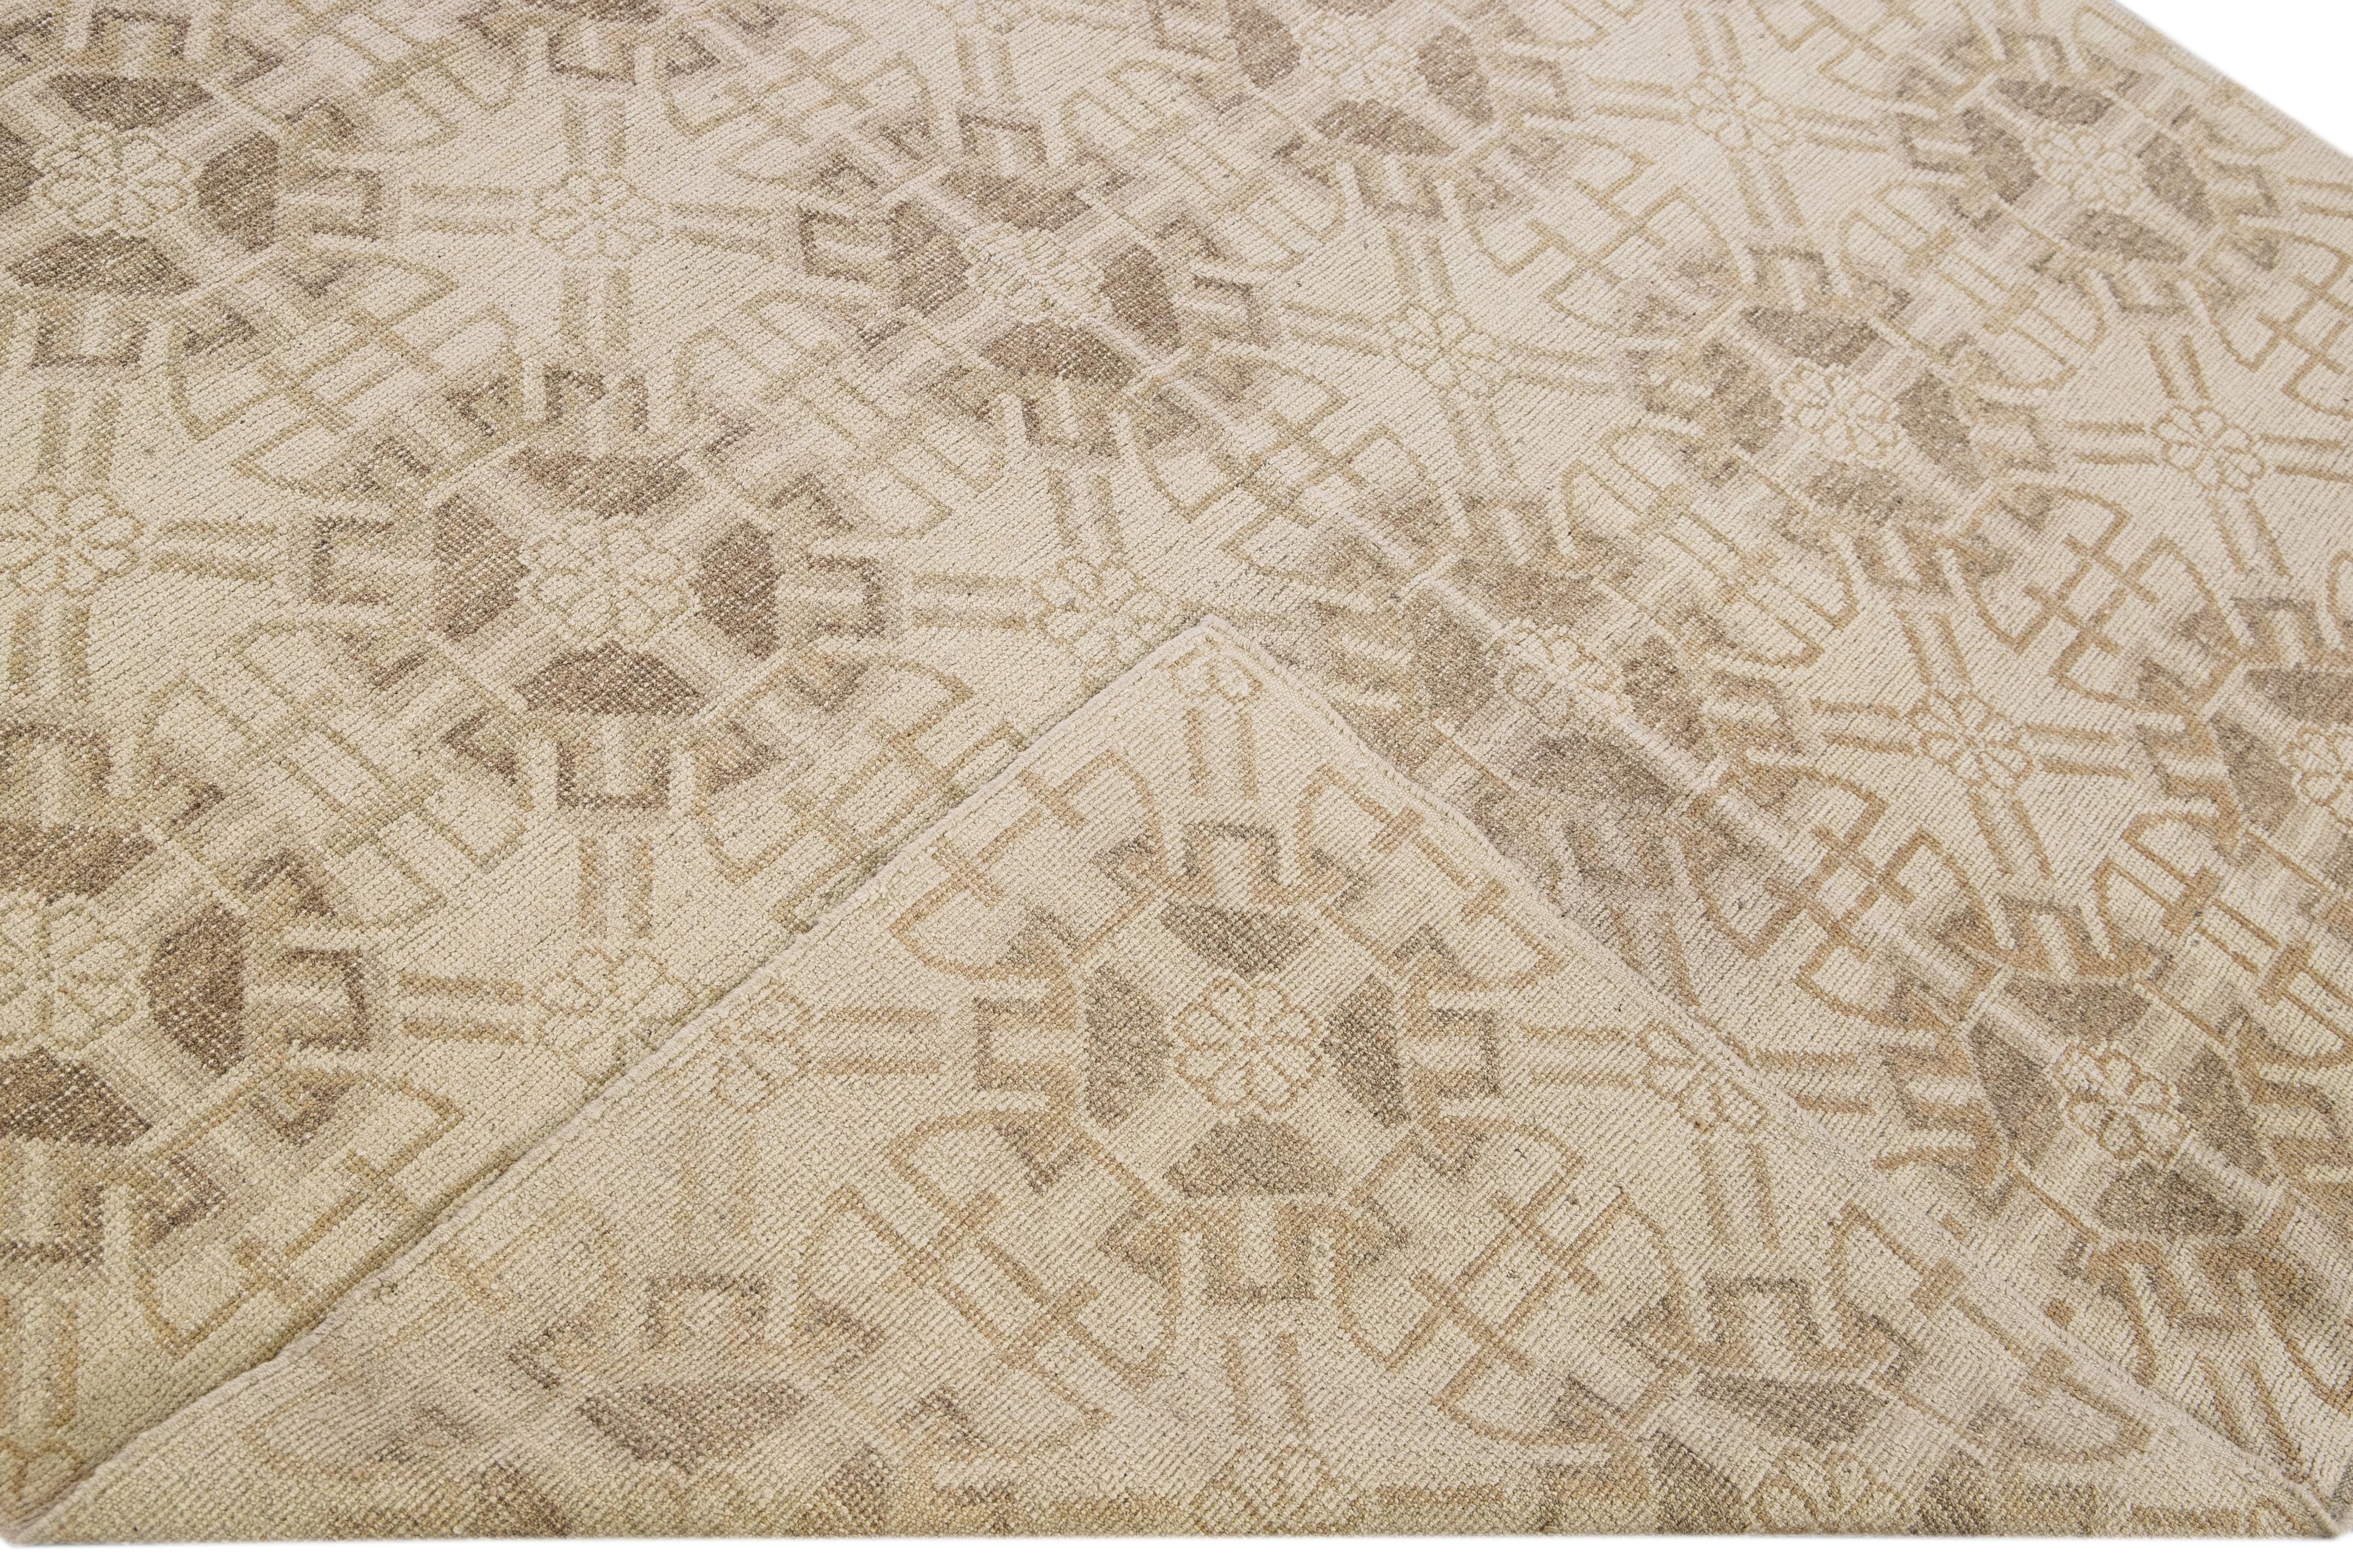 Beautiful modern Tibetan hand-knotted wool rug with a beige field. This Tibetan rug has brown accents in a gorgeous all-over geometric pattern design.

This rug measures 6'1